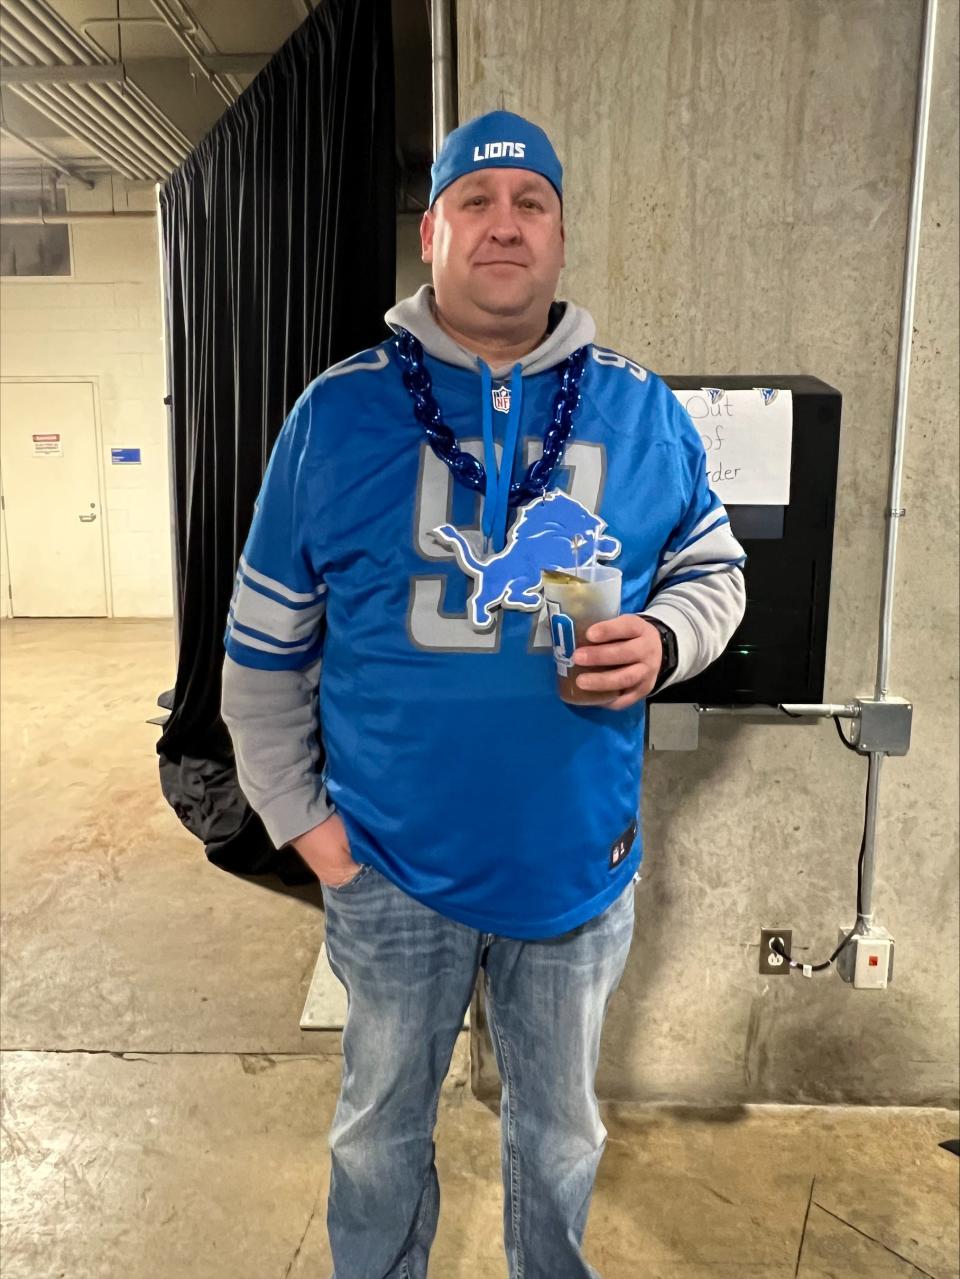 Derek Kirby, of Flint, poses for a photo at halftime of the Detroit Lions vs. Tampa Bay Buccaneers game on Sunday, Jan. 21, 2024. Kirby hoped for a more commanding second half performance from the Lions.